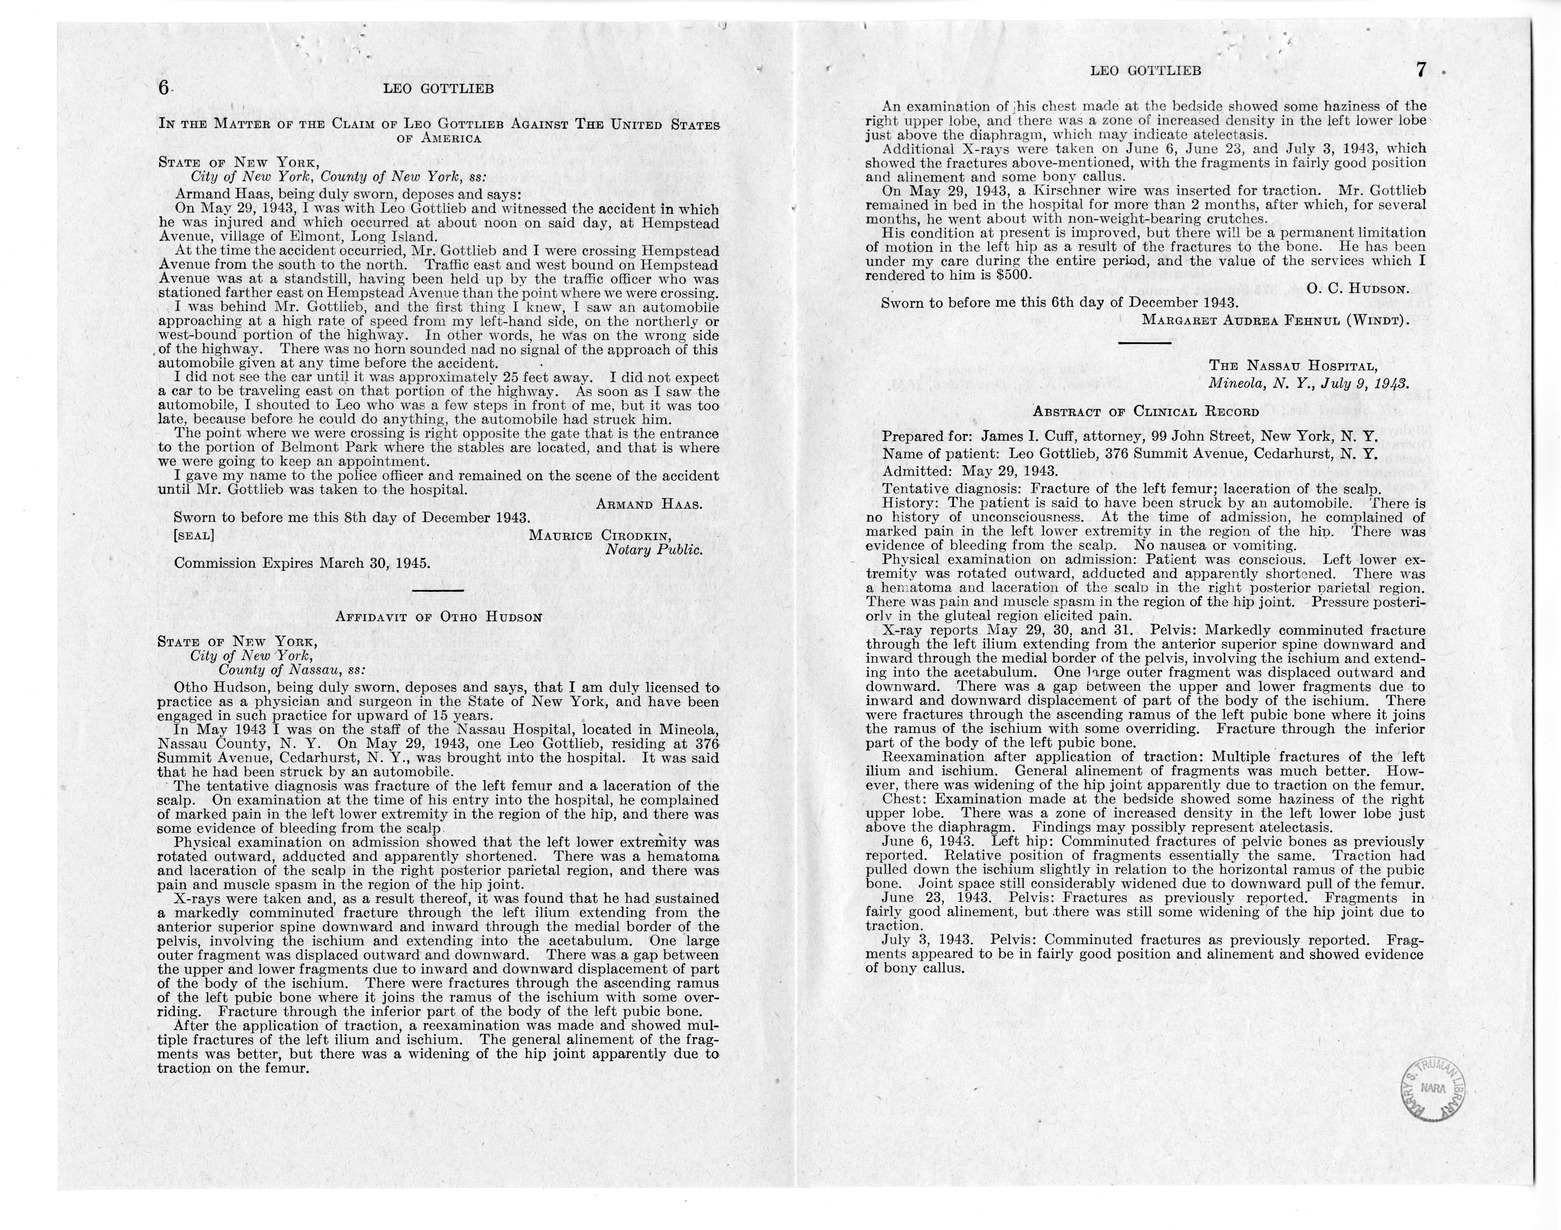 Memorandum from Harold D. Smith to M. C. Latta, H.R. 259, For the Relief of Leo Gottlieb, with Attachments